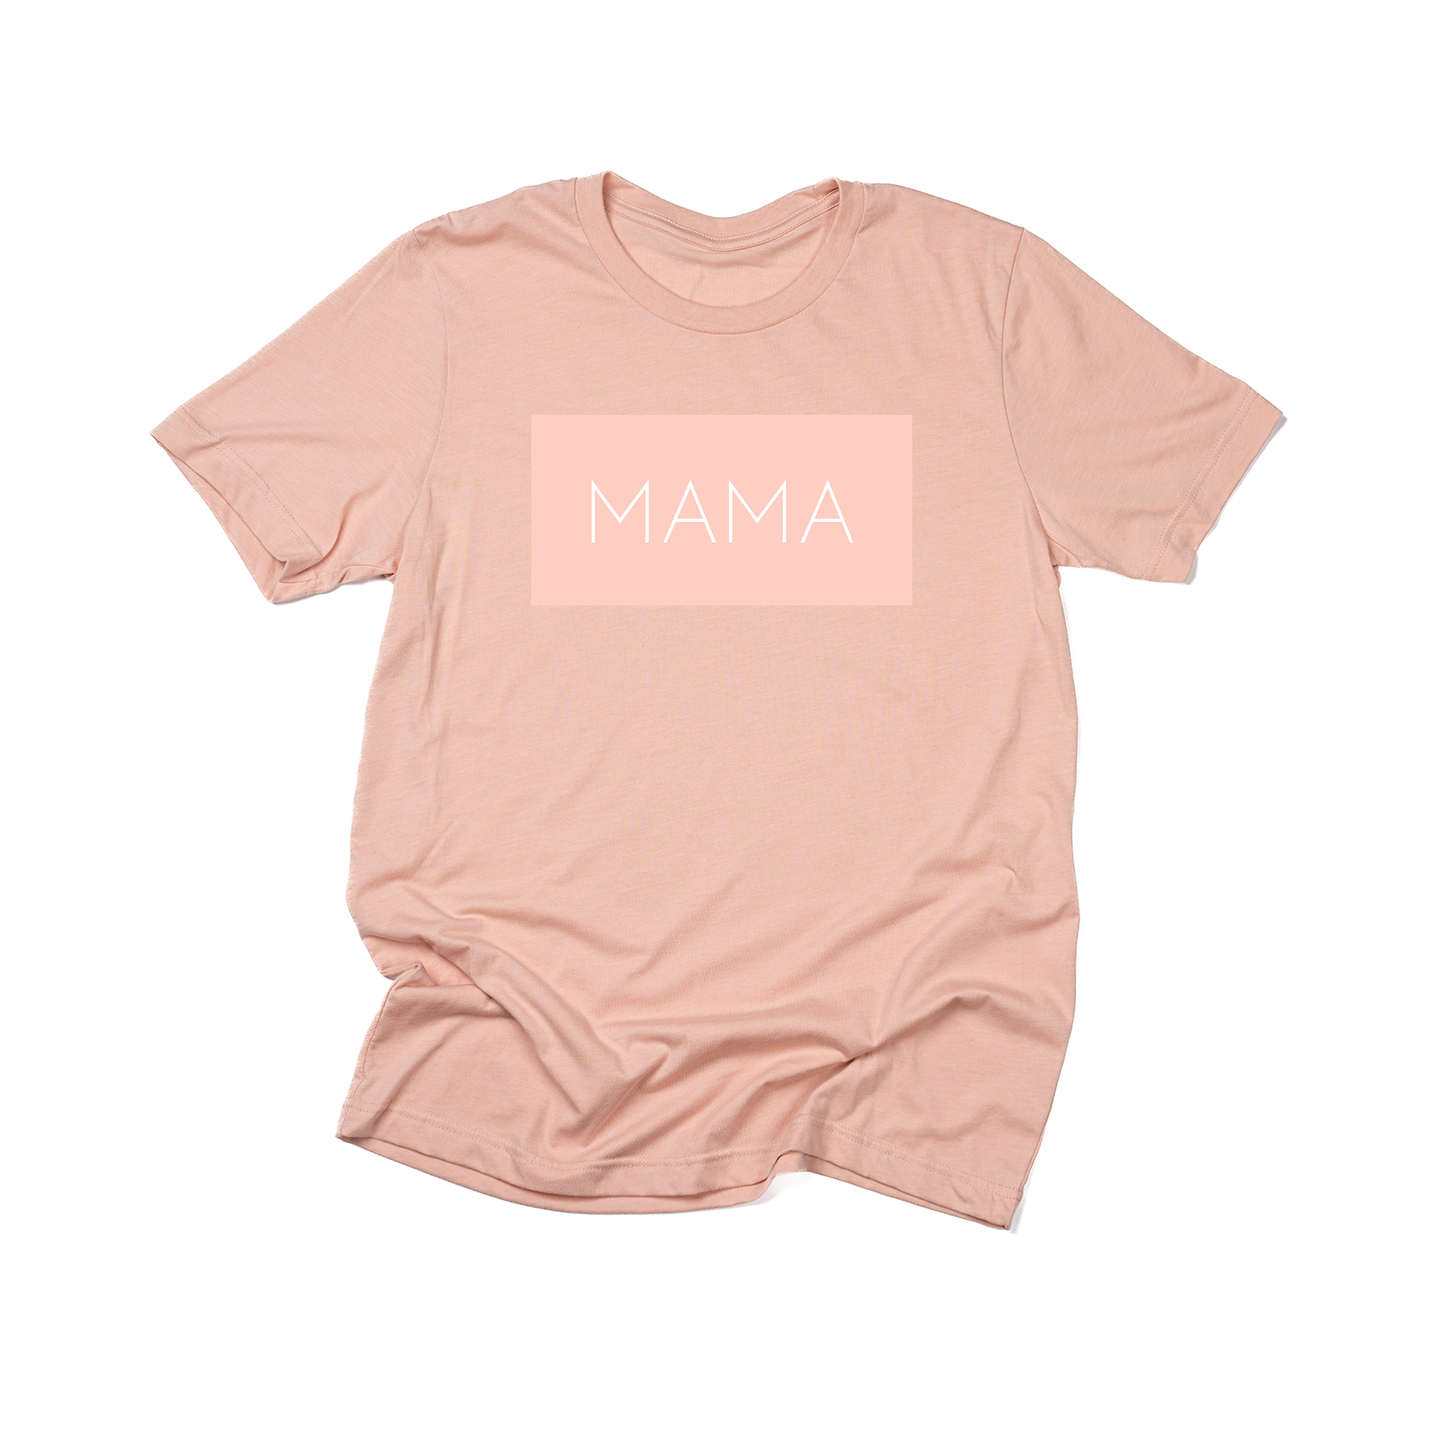 Mama (Boxed Collection, Ballerina Pink Box/White Text, Across Front) - Tee (Peach)